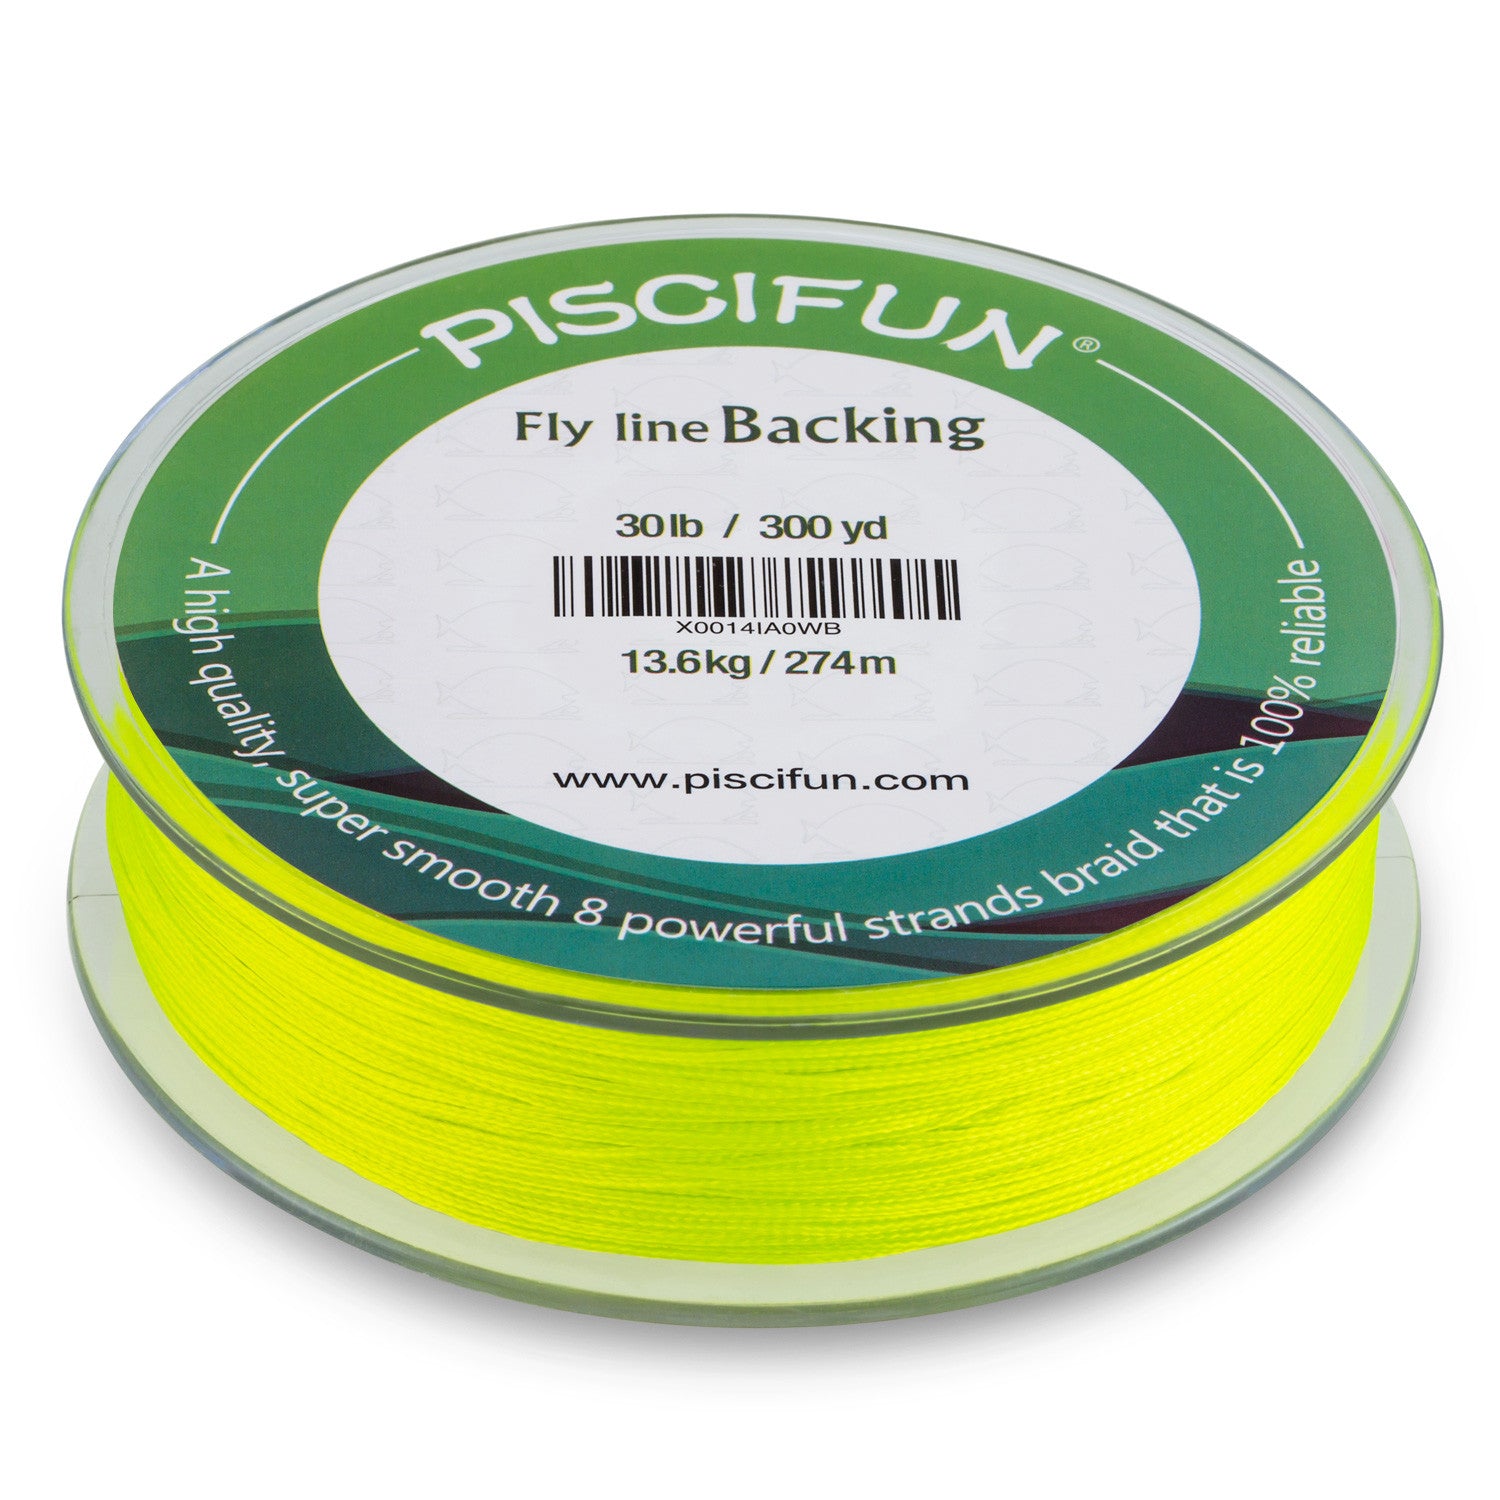 Piscifun® Fly Line Backing